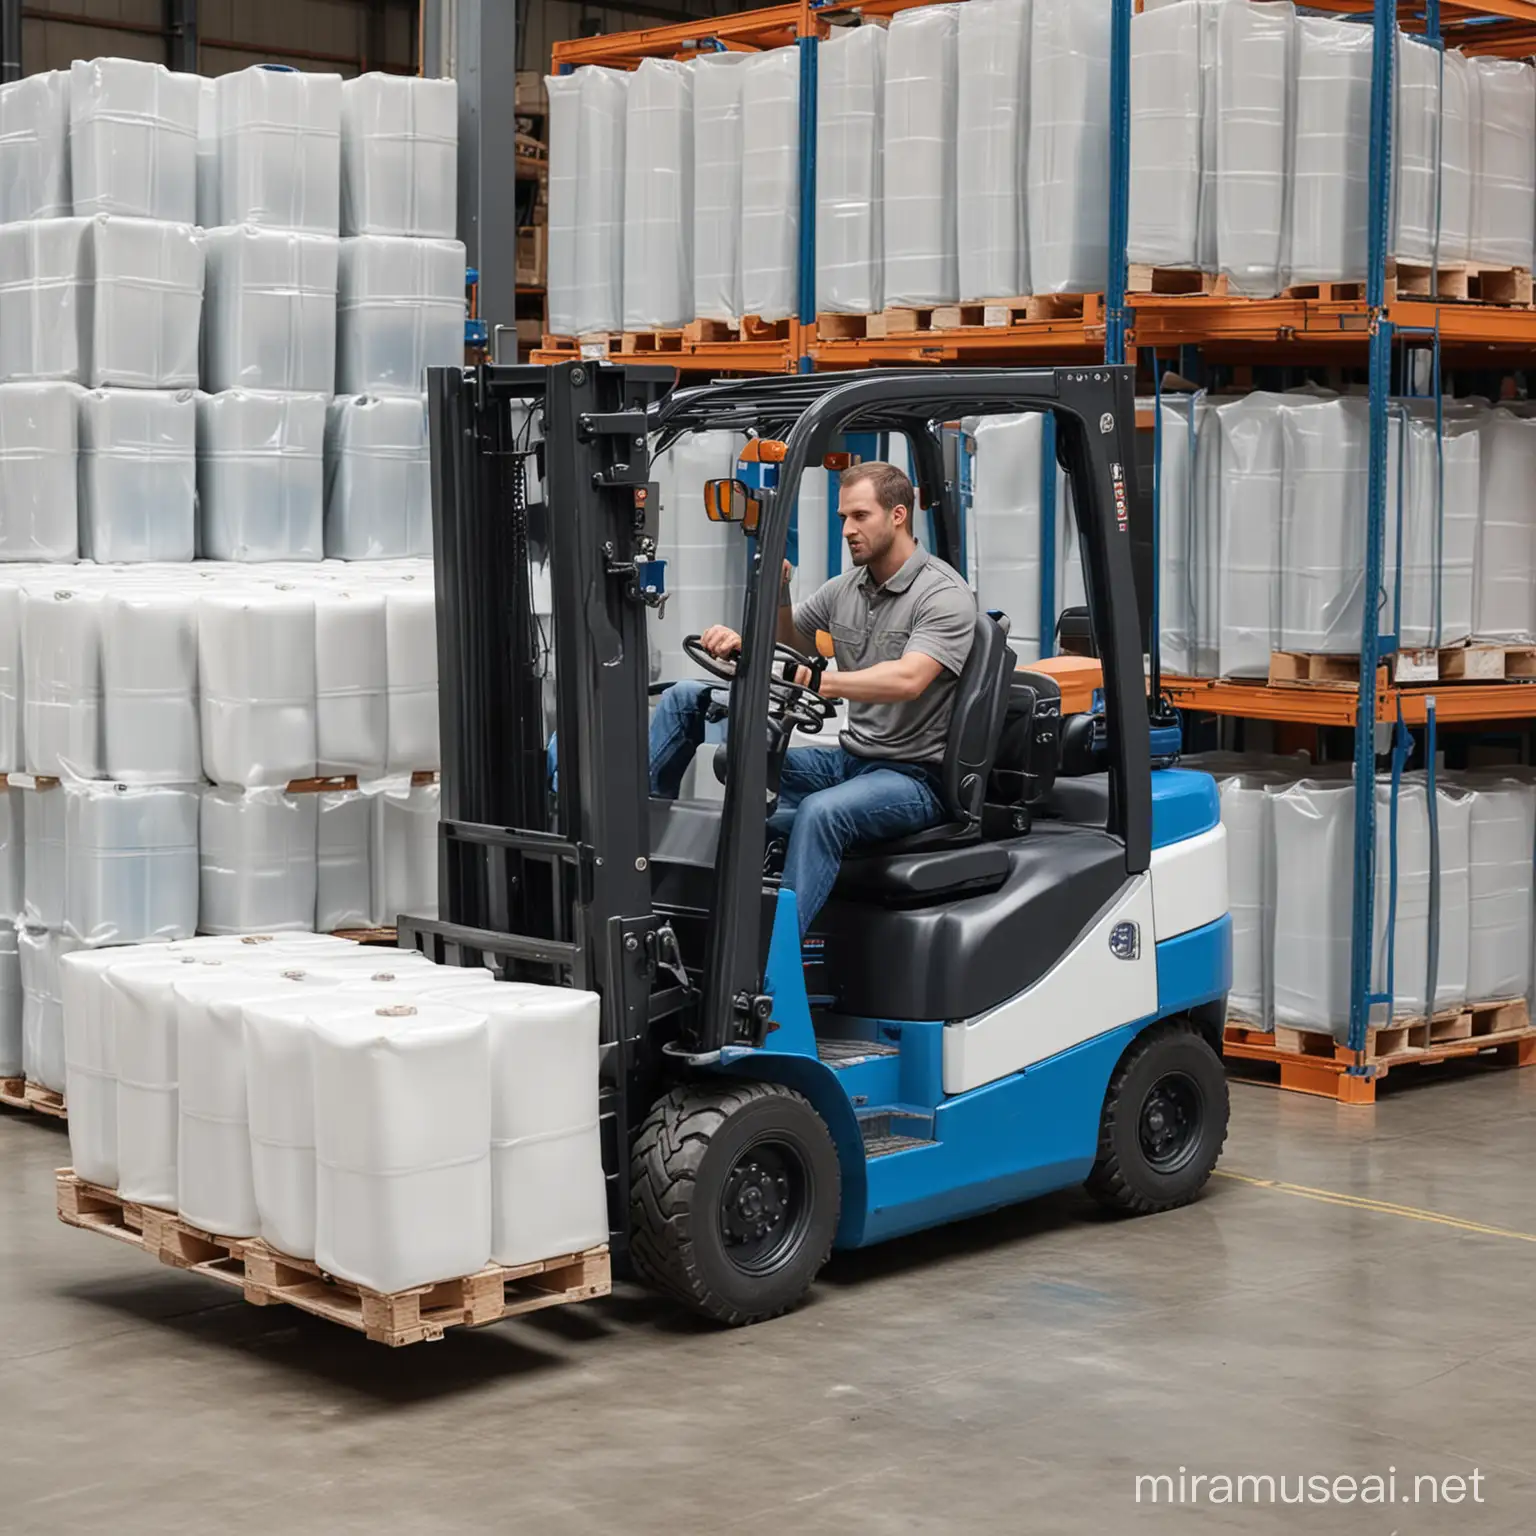 a realistic and detailed image of a forklift operator ( a european man) transporting a white plastic square container in a warehouse, surrounded by blue plastic barrels. d the 